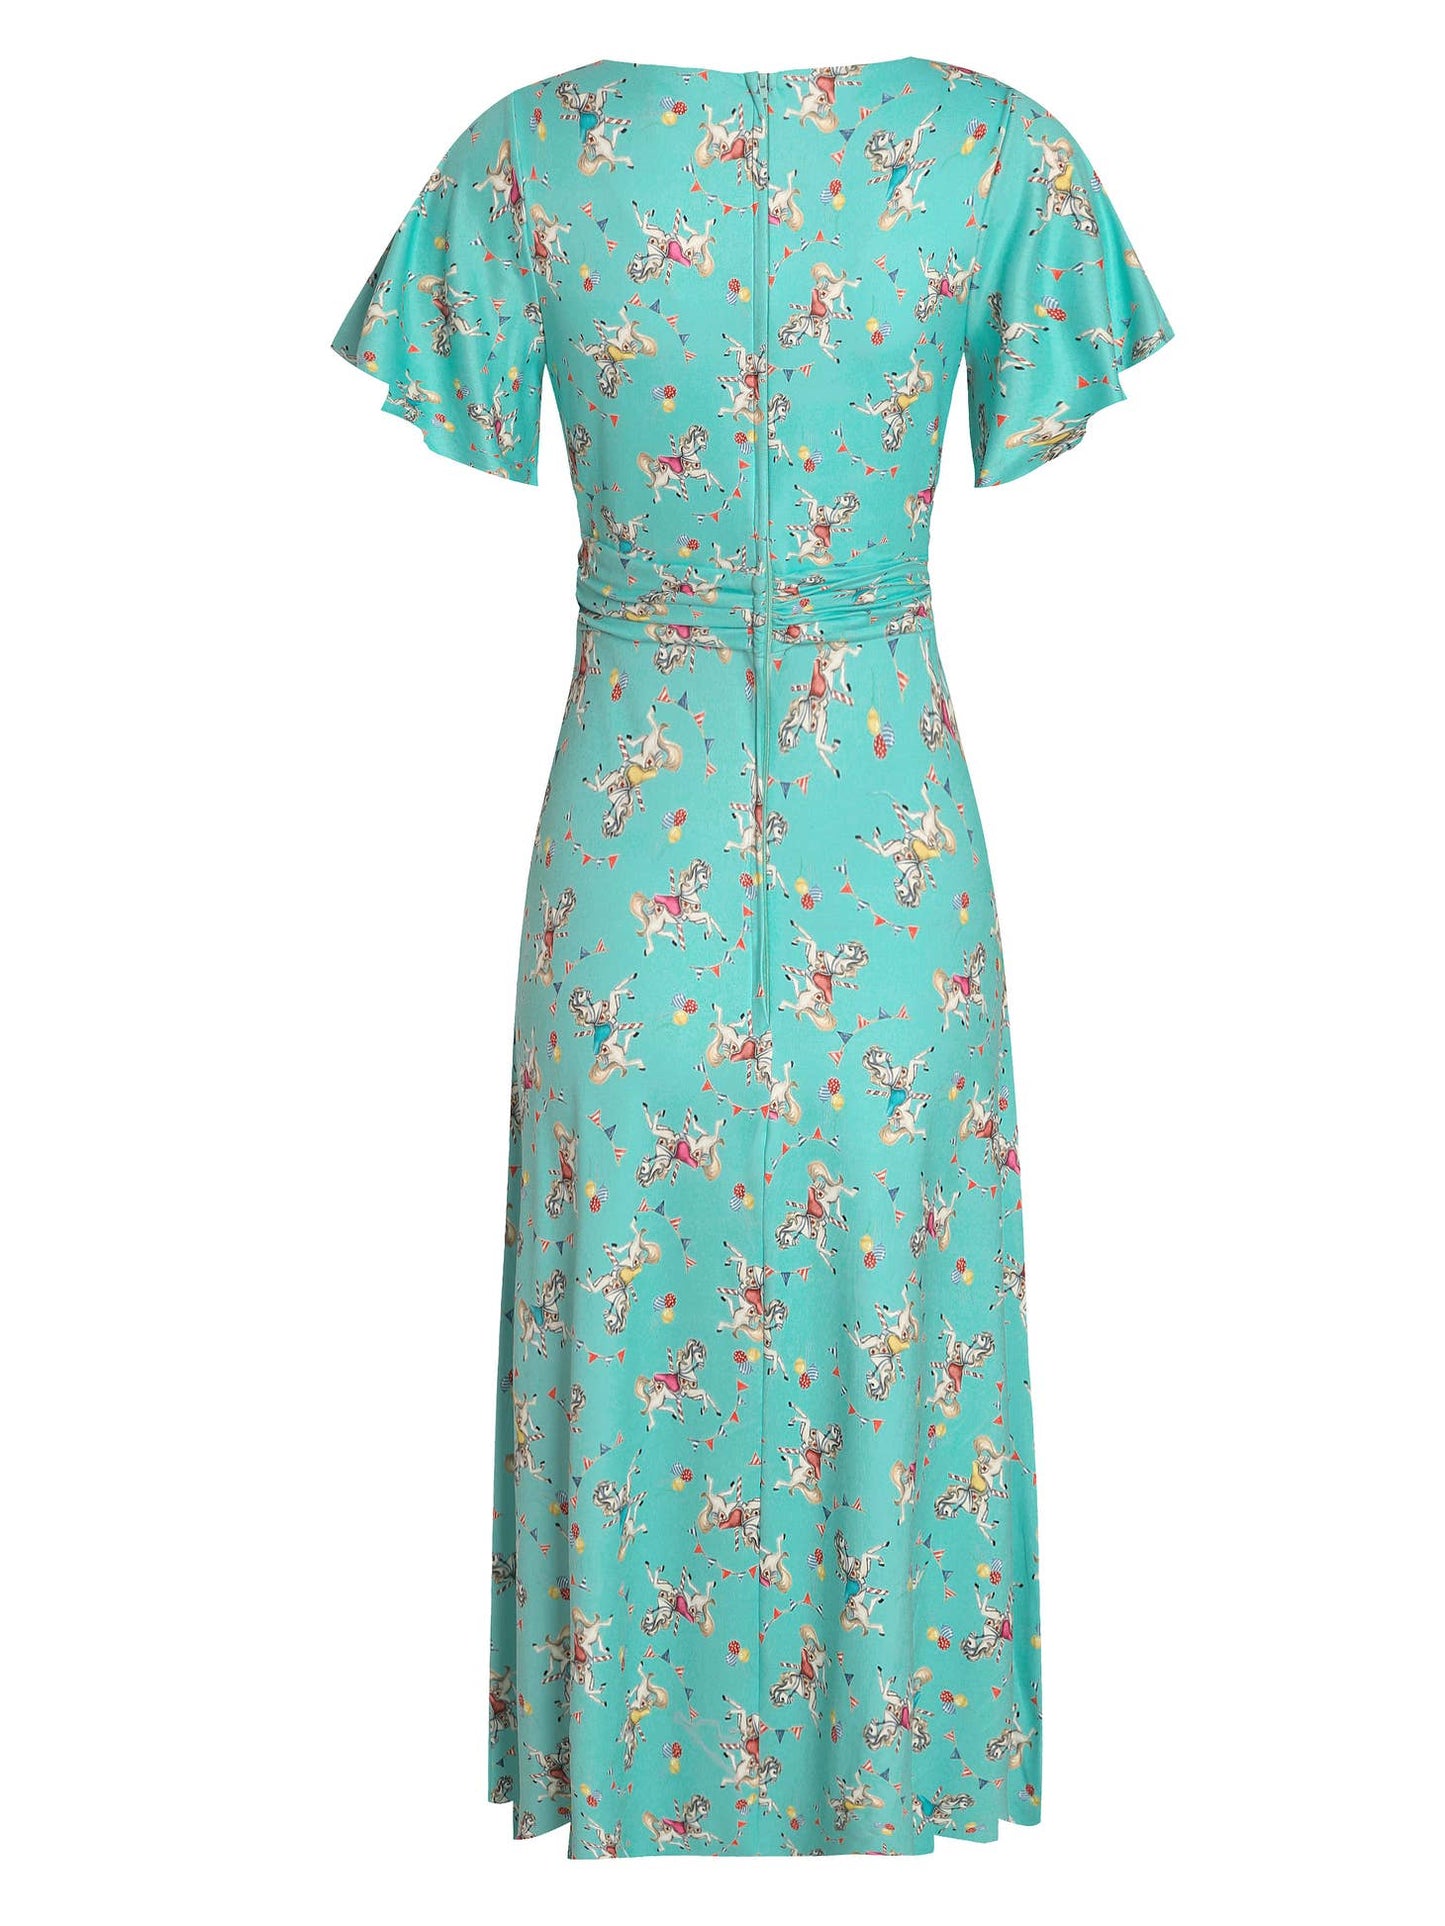 dolly and dotty turquoise carousel uk 10 to 18  £64.95